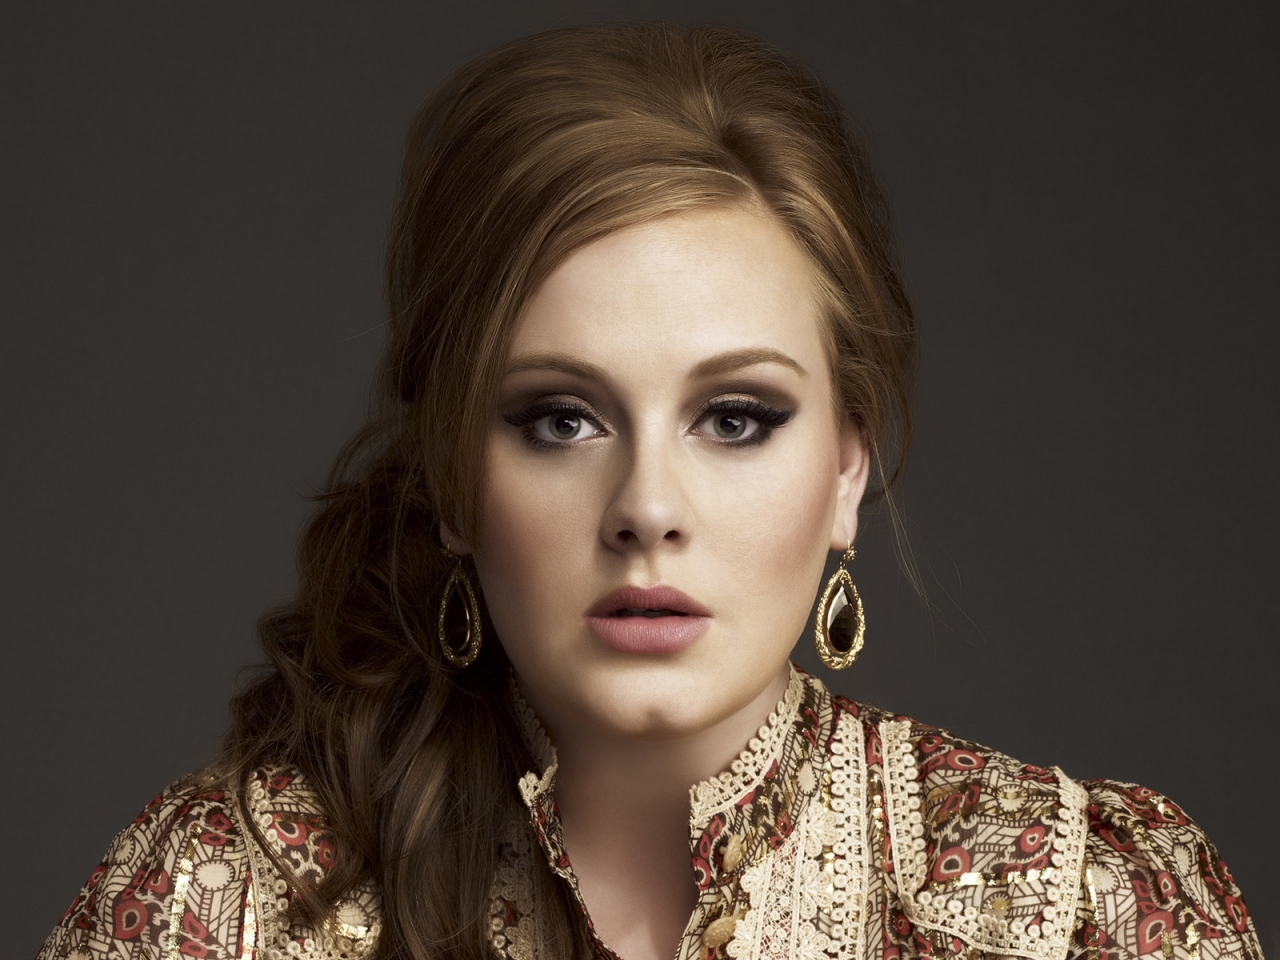 Adele Laurie Blue Adkins for 1280 x 960 resolution